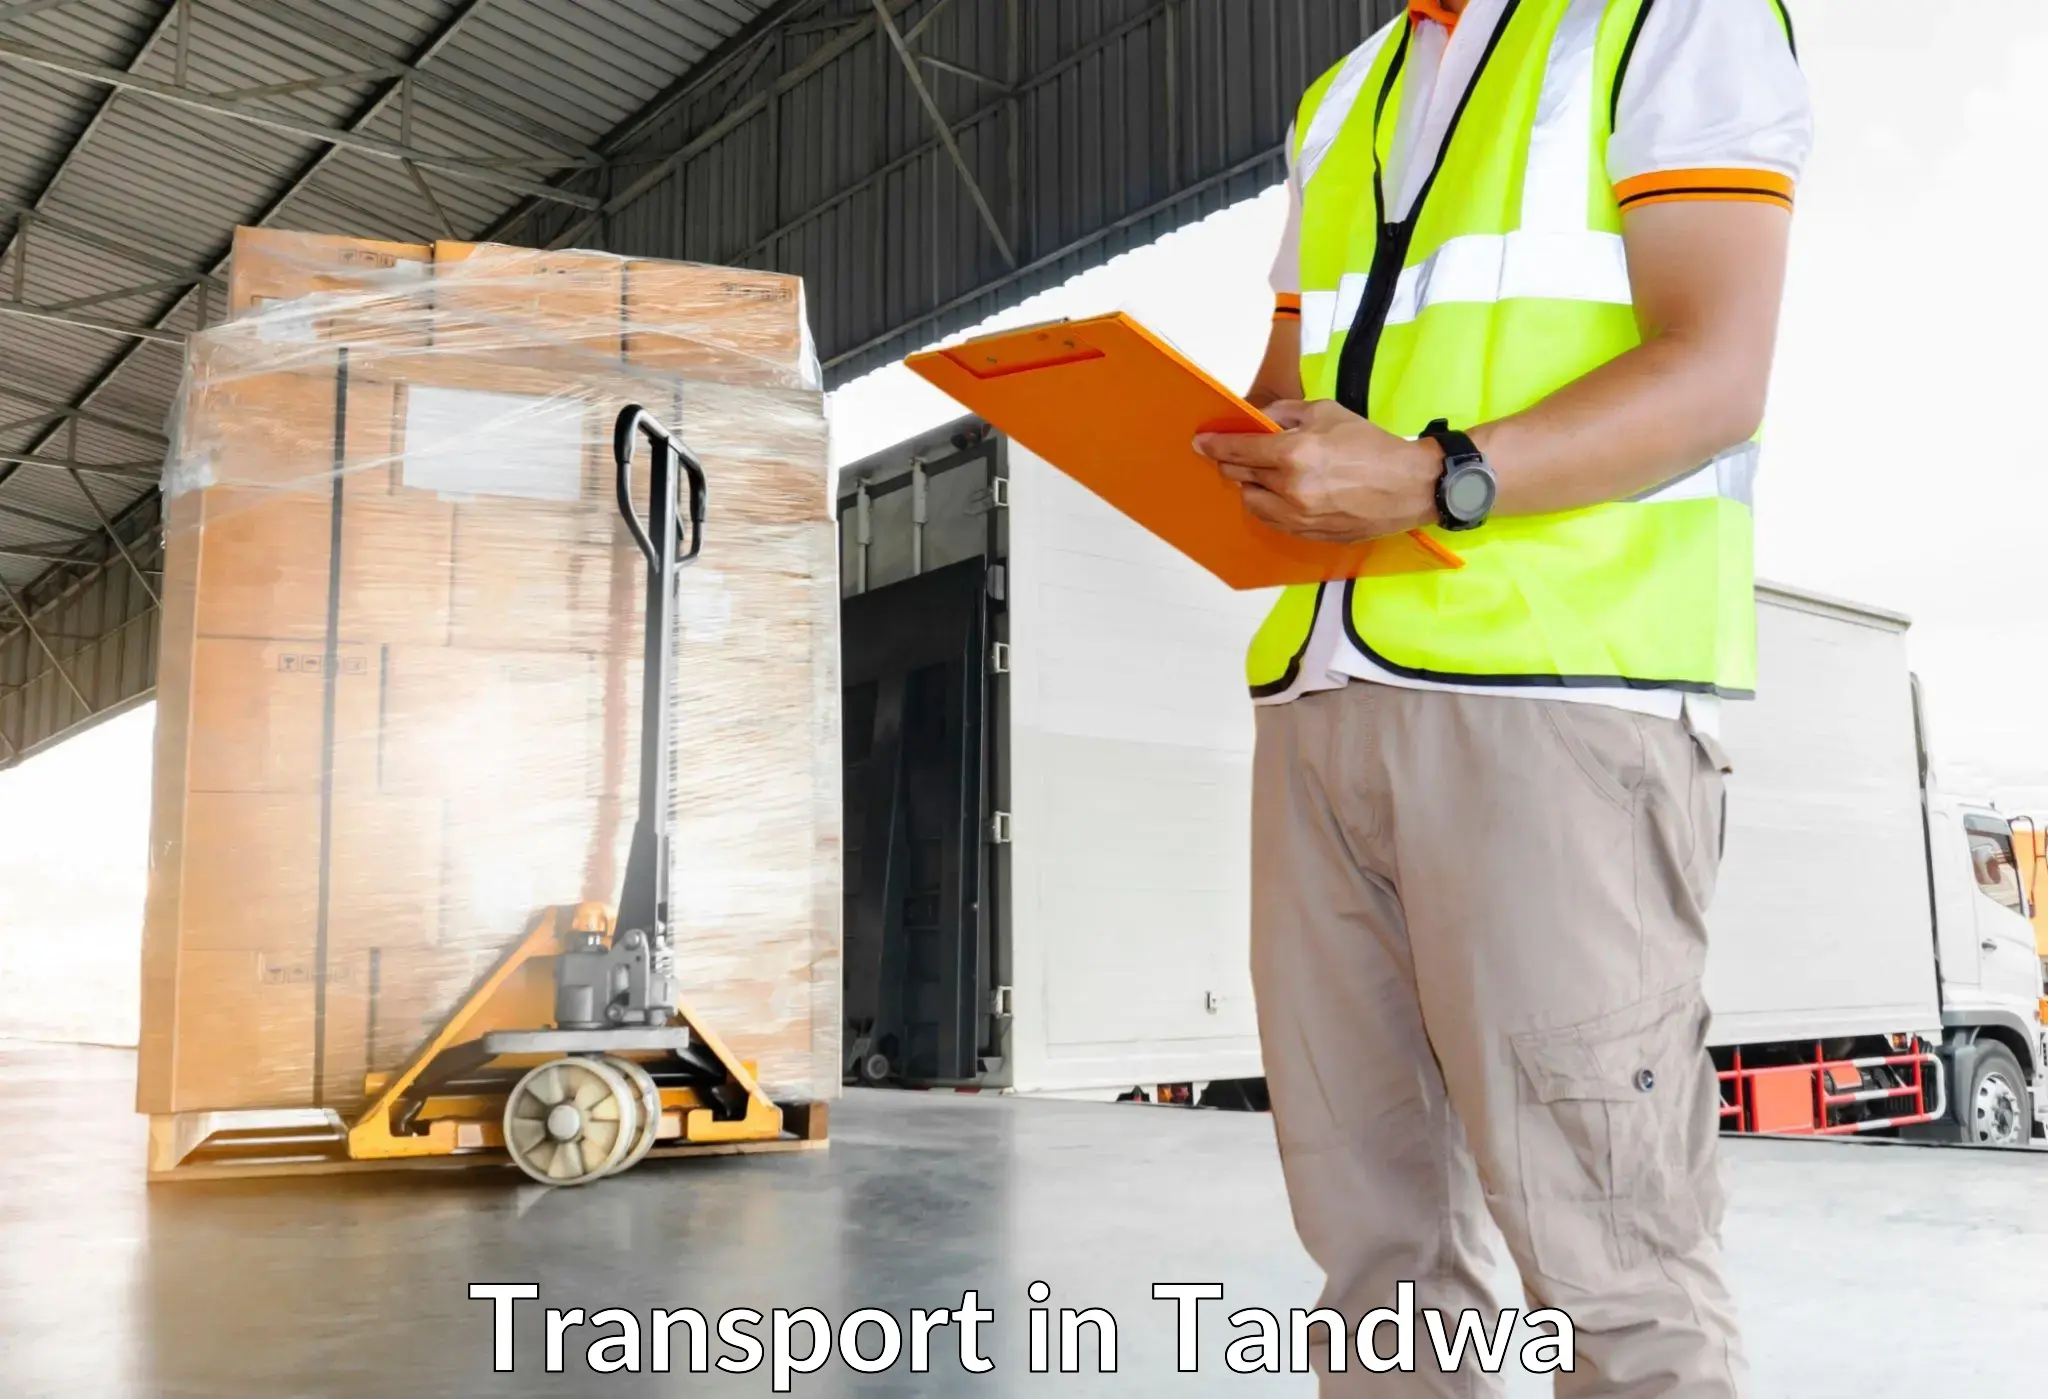 Vehicle transport services in Tandwa